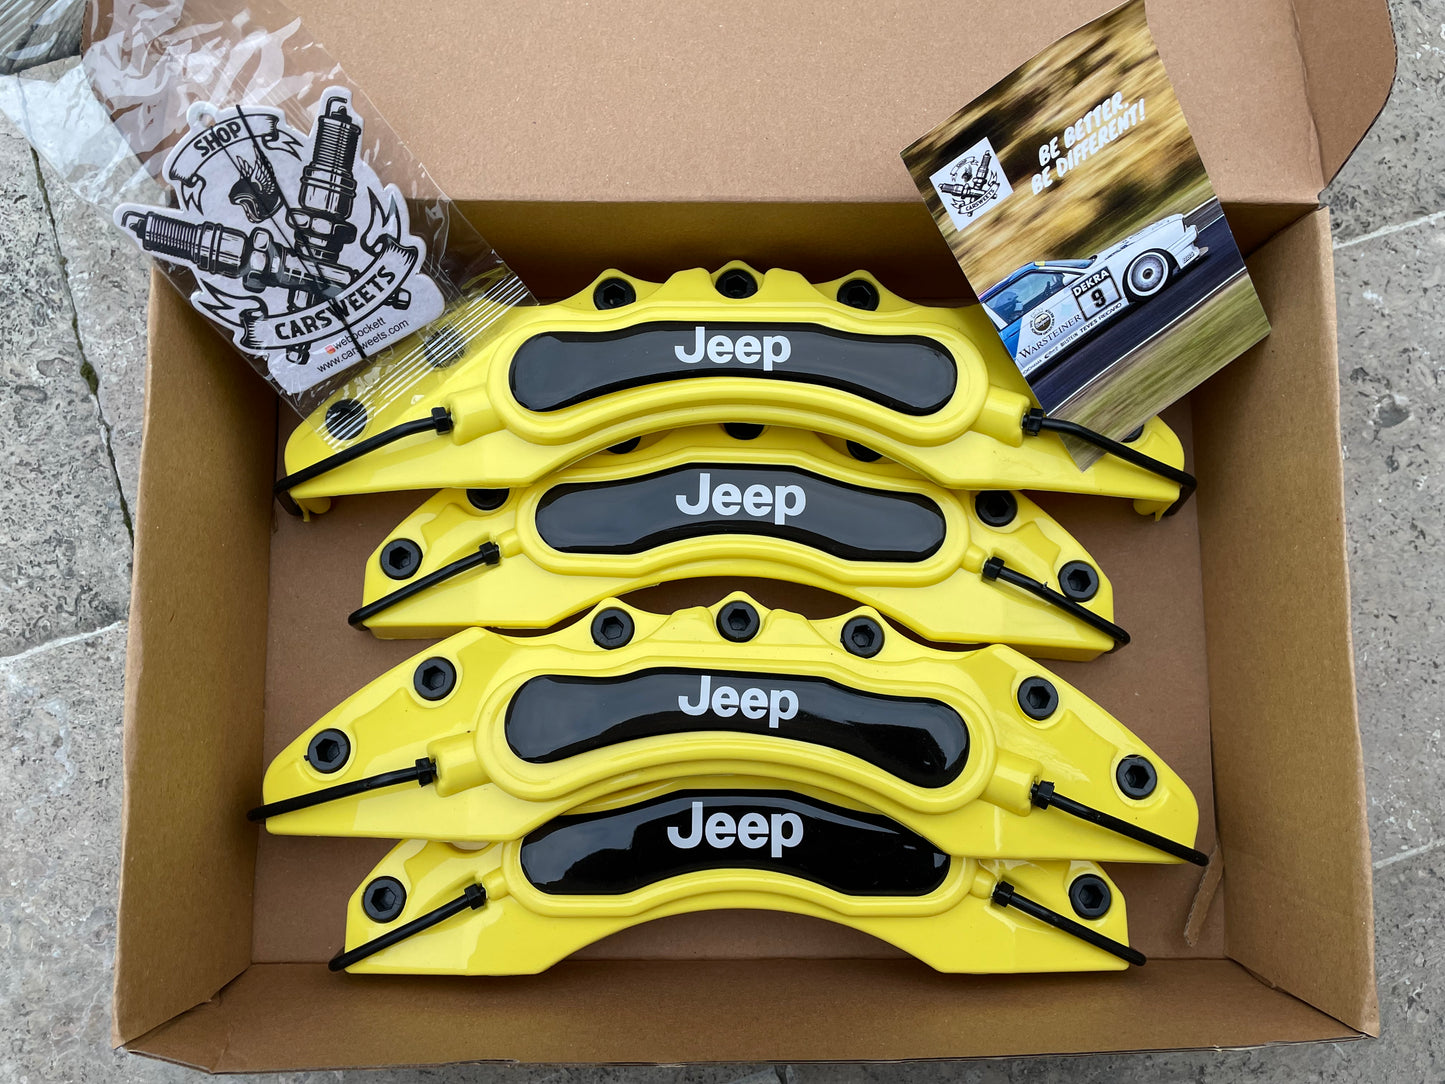 4pc Brake Caliper Covers for Jeep Yellow